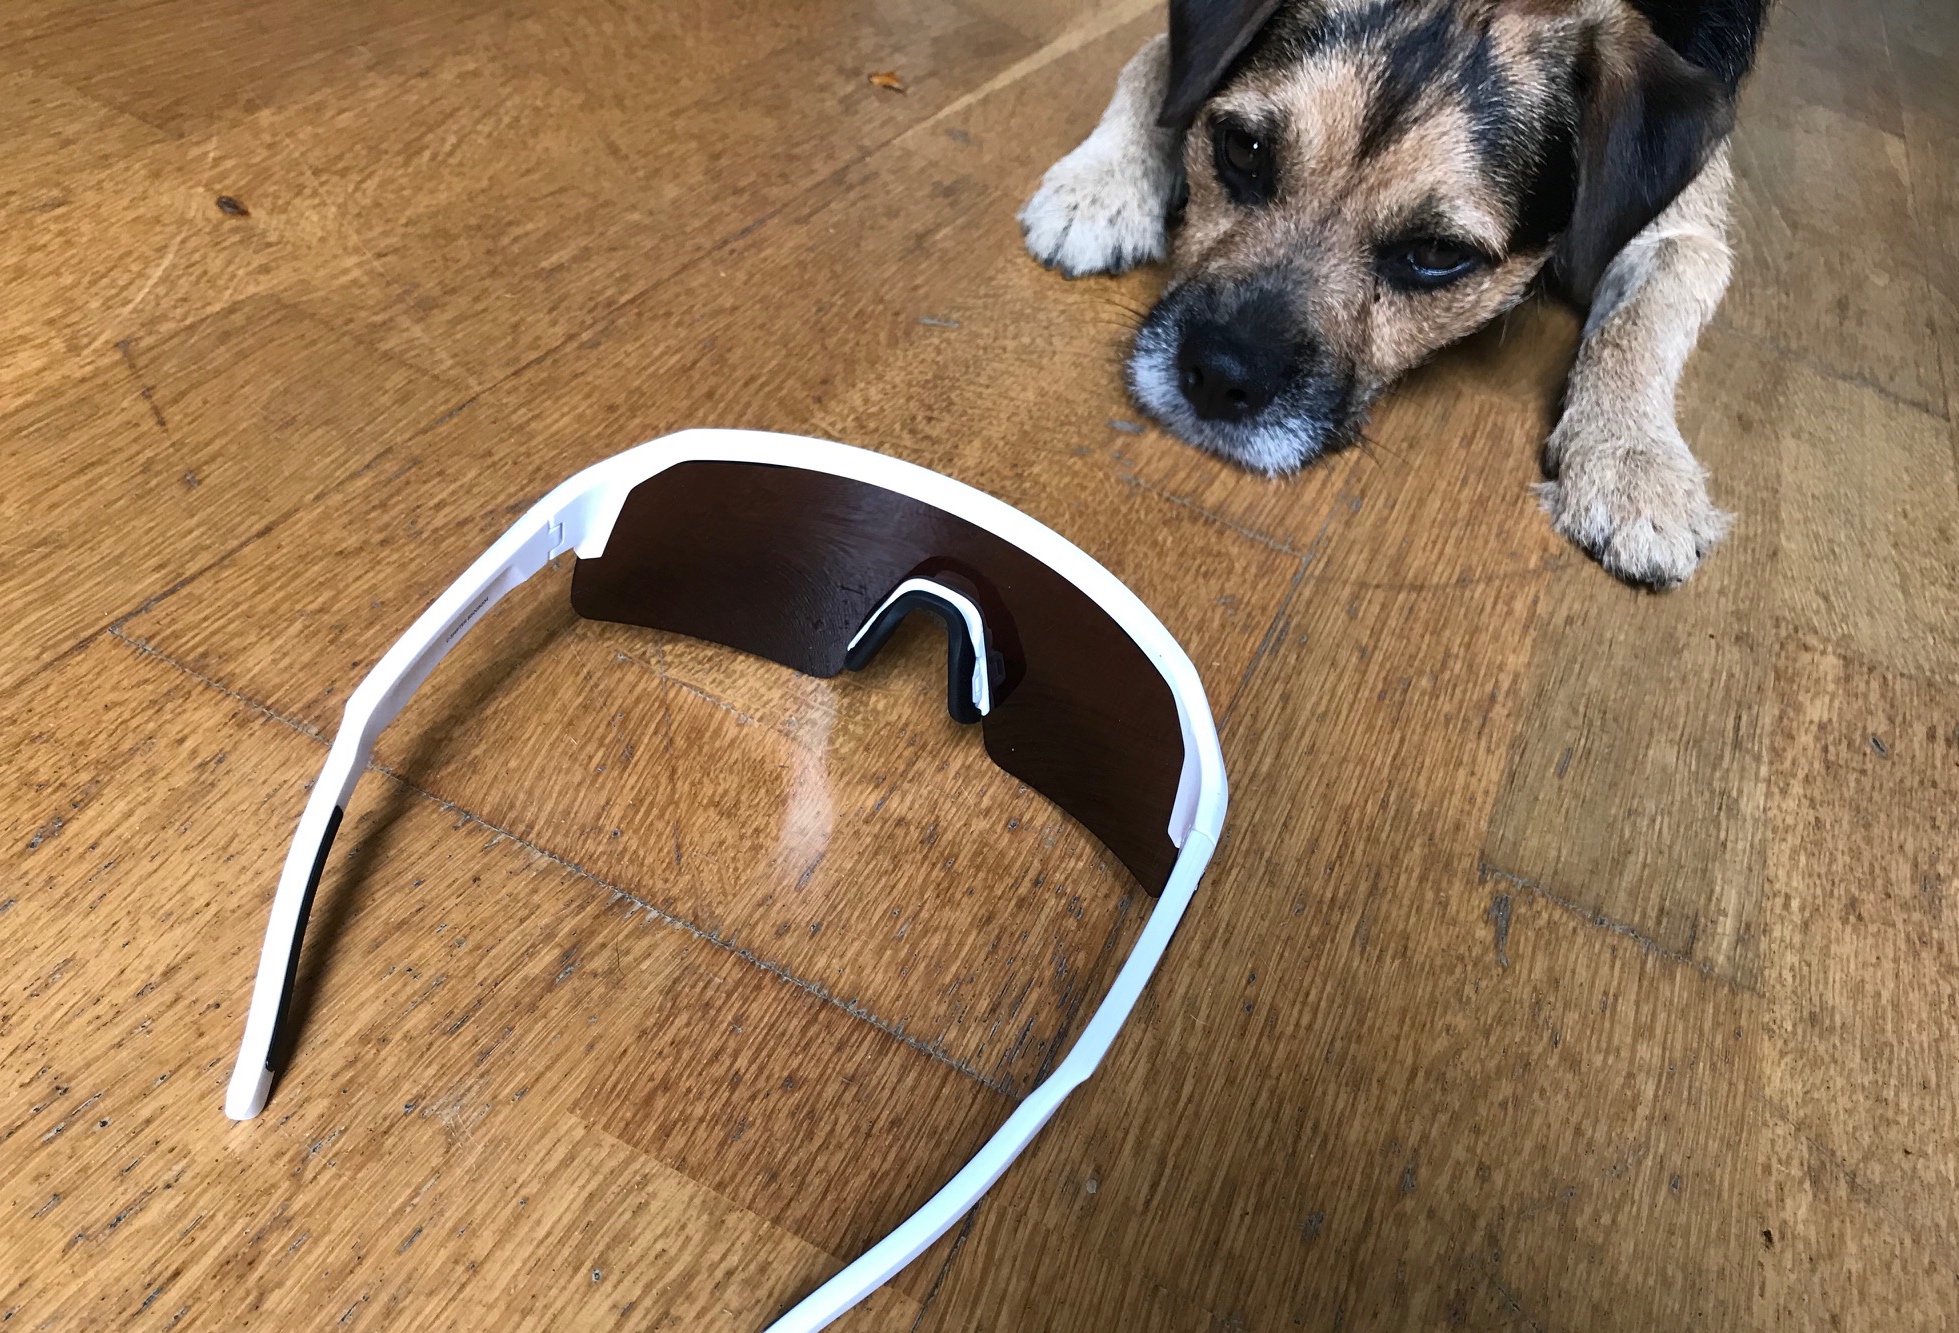 Bolle C-Shifter glasses on a wood background with a dog